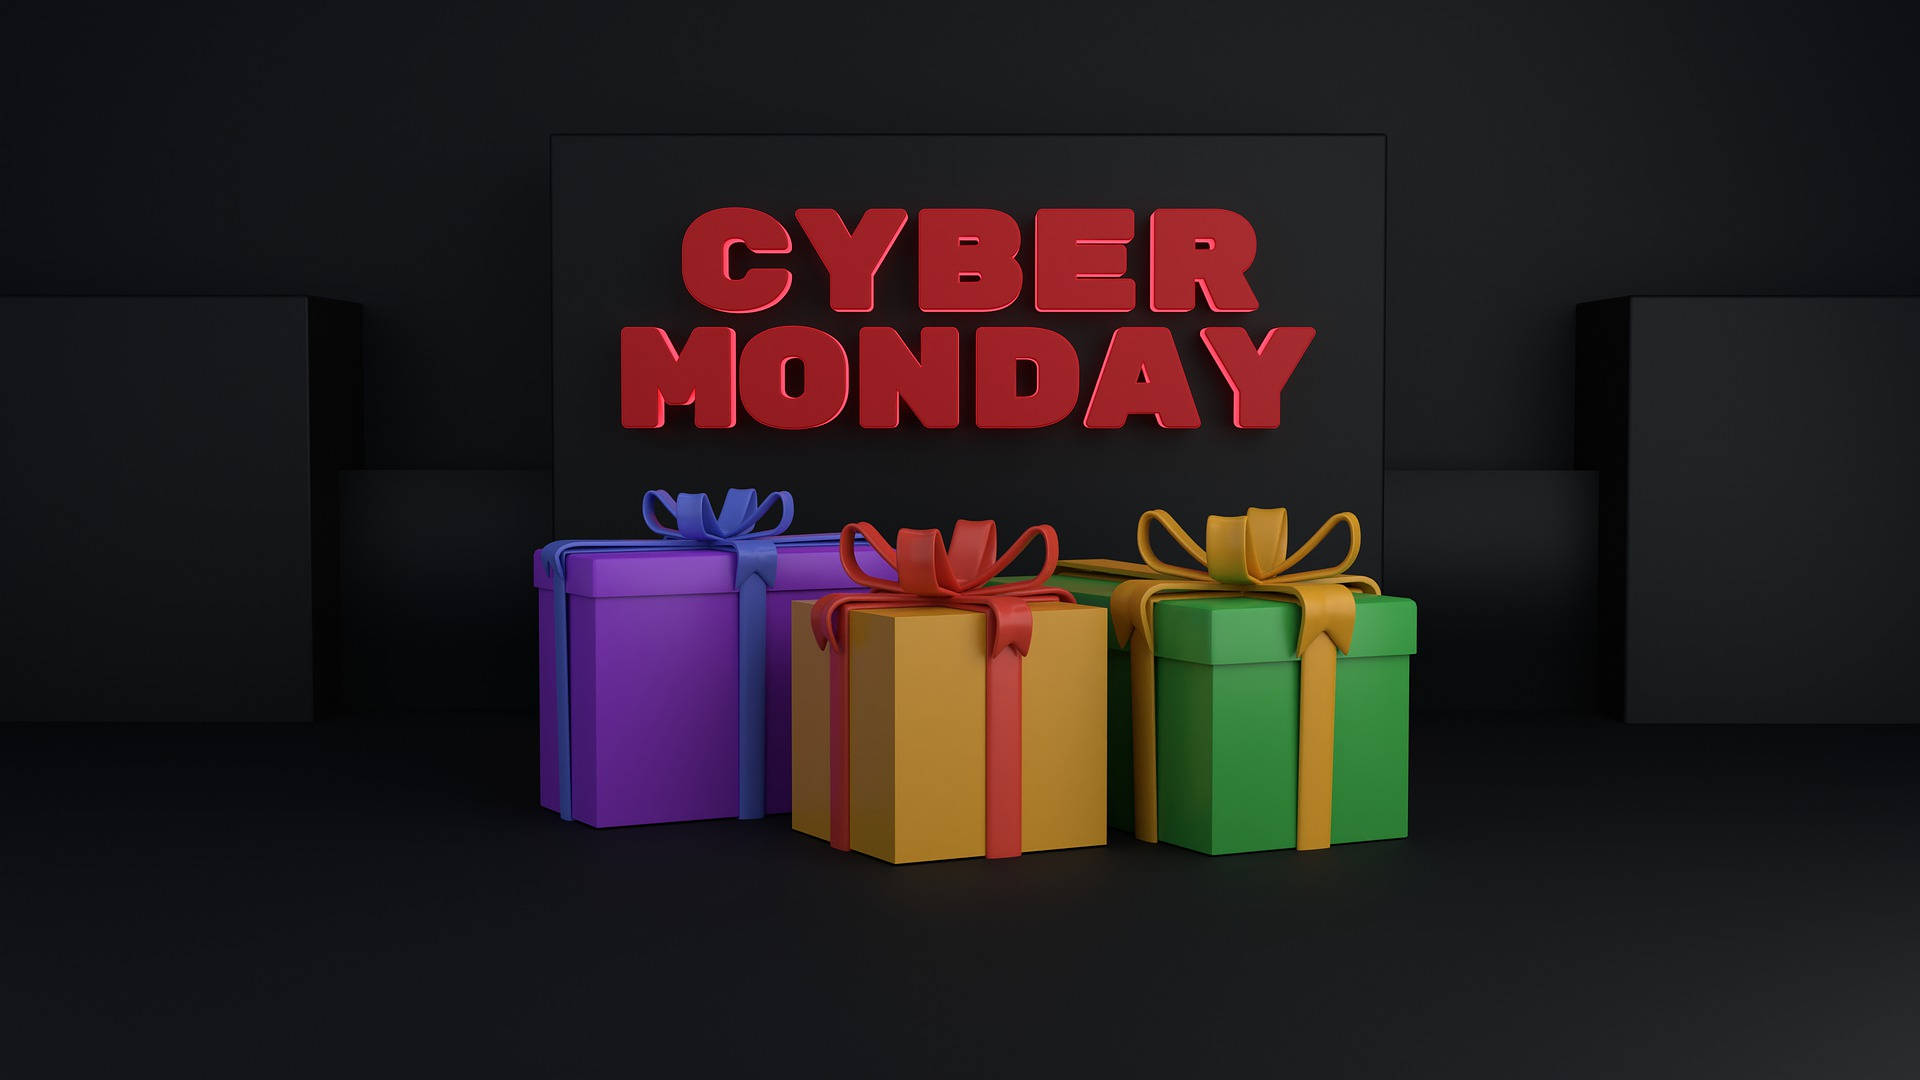 Cyber Monday Gifts And Presents Background